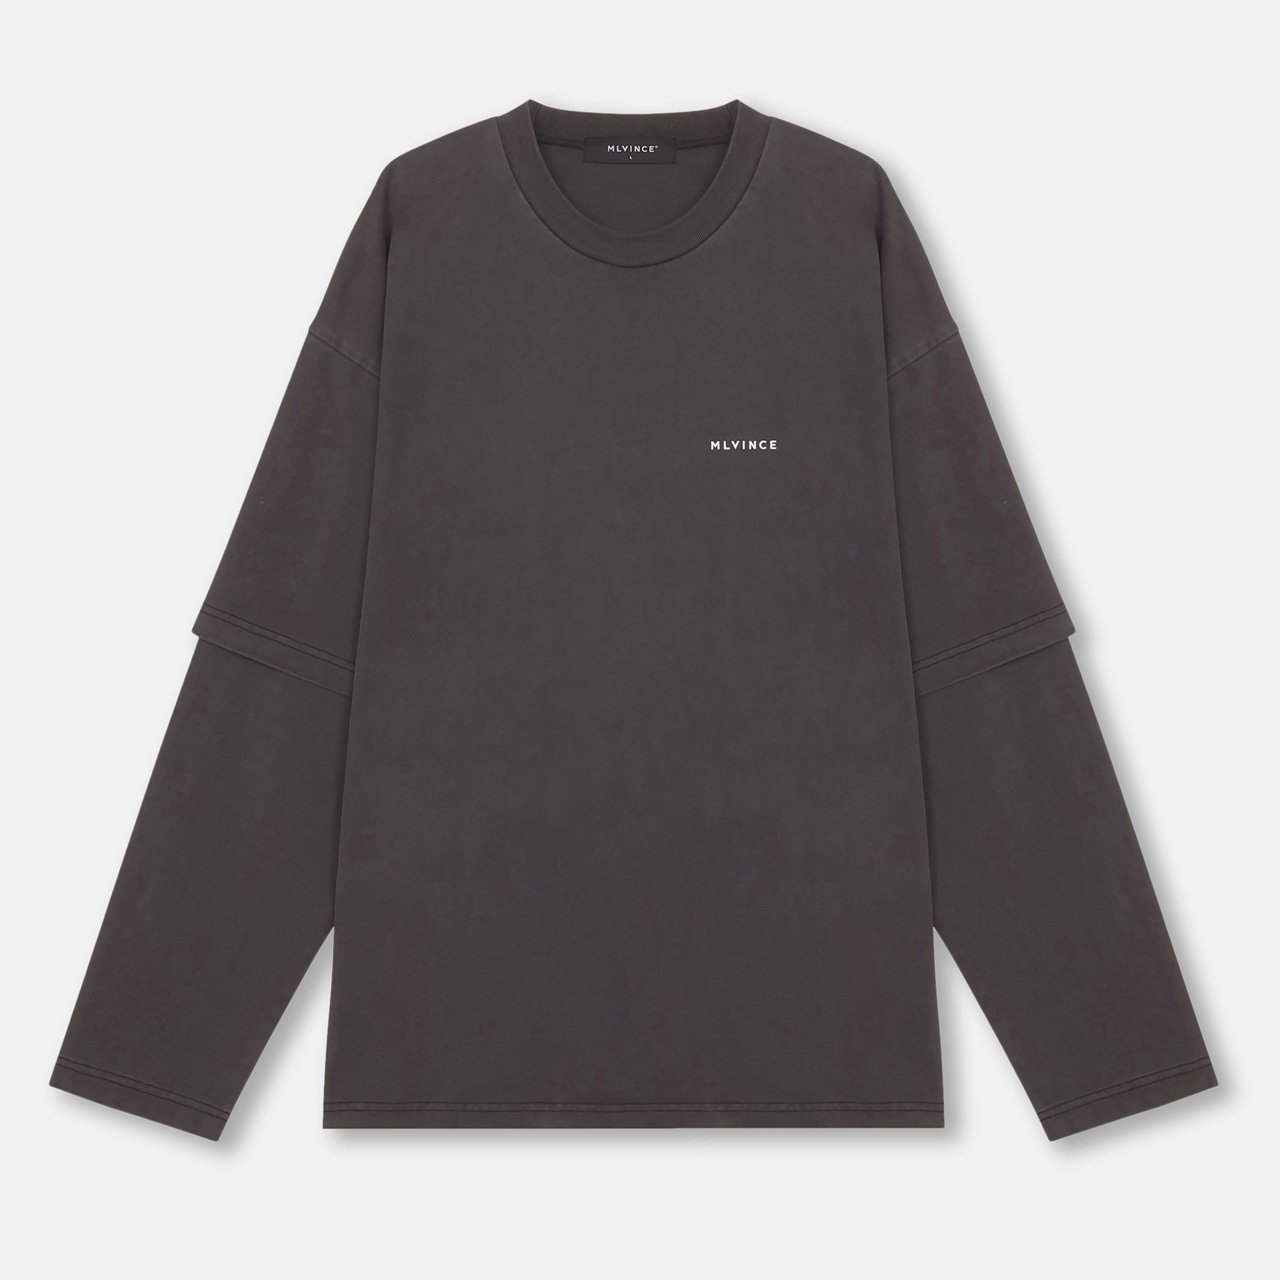 MLVINCE (メルヴィンス) | CLASSIC LOGO LAYERED L/S TEE WASHED BLACK